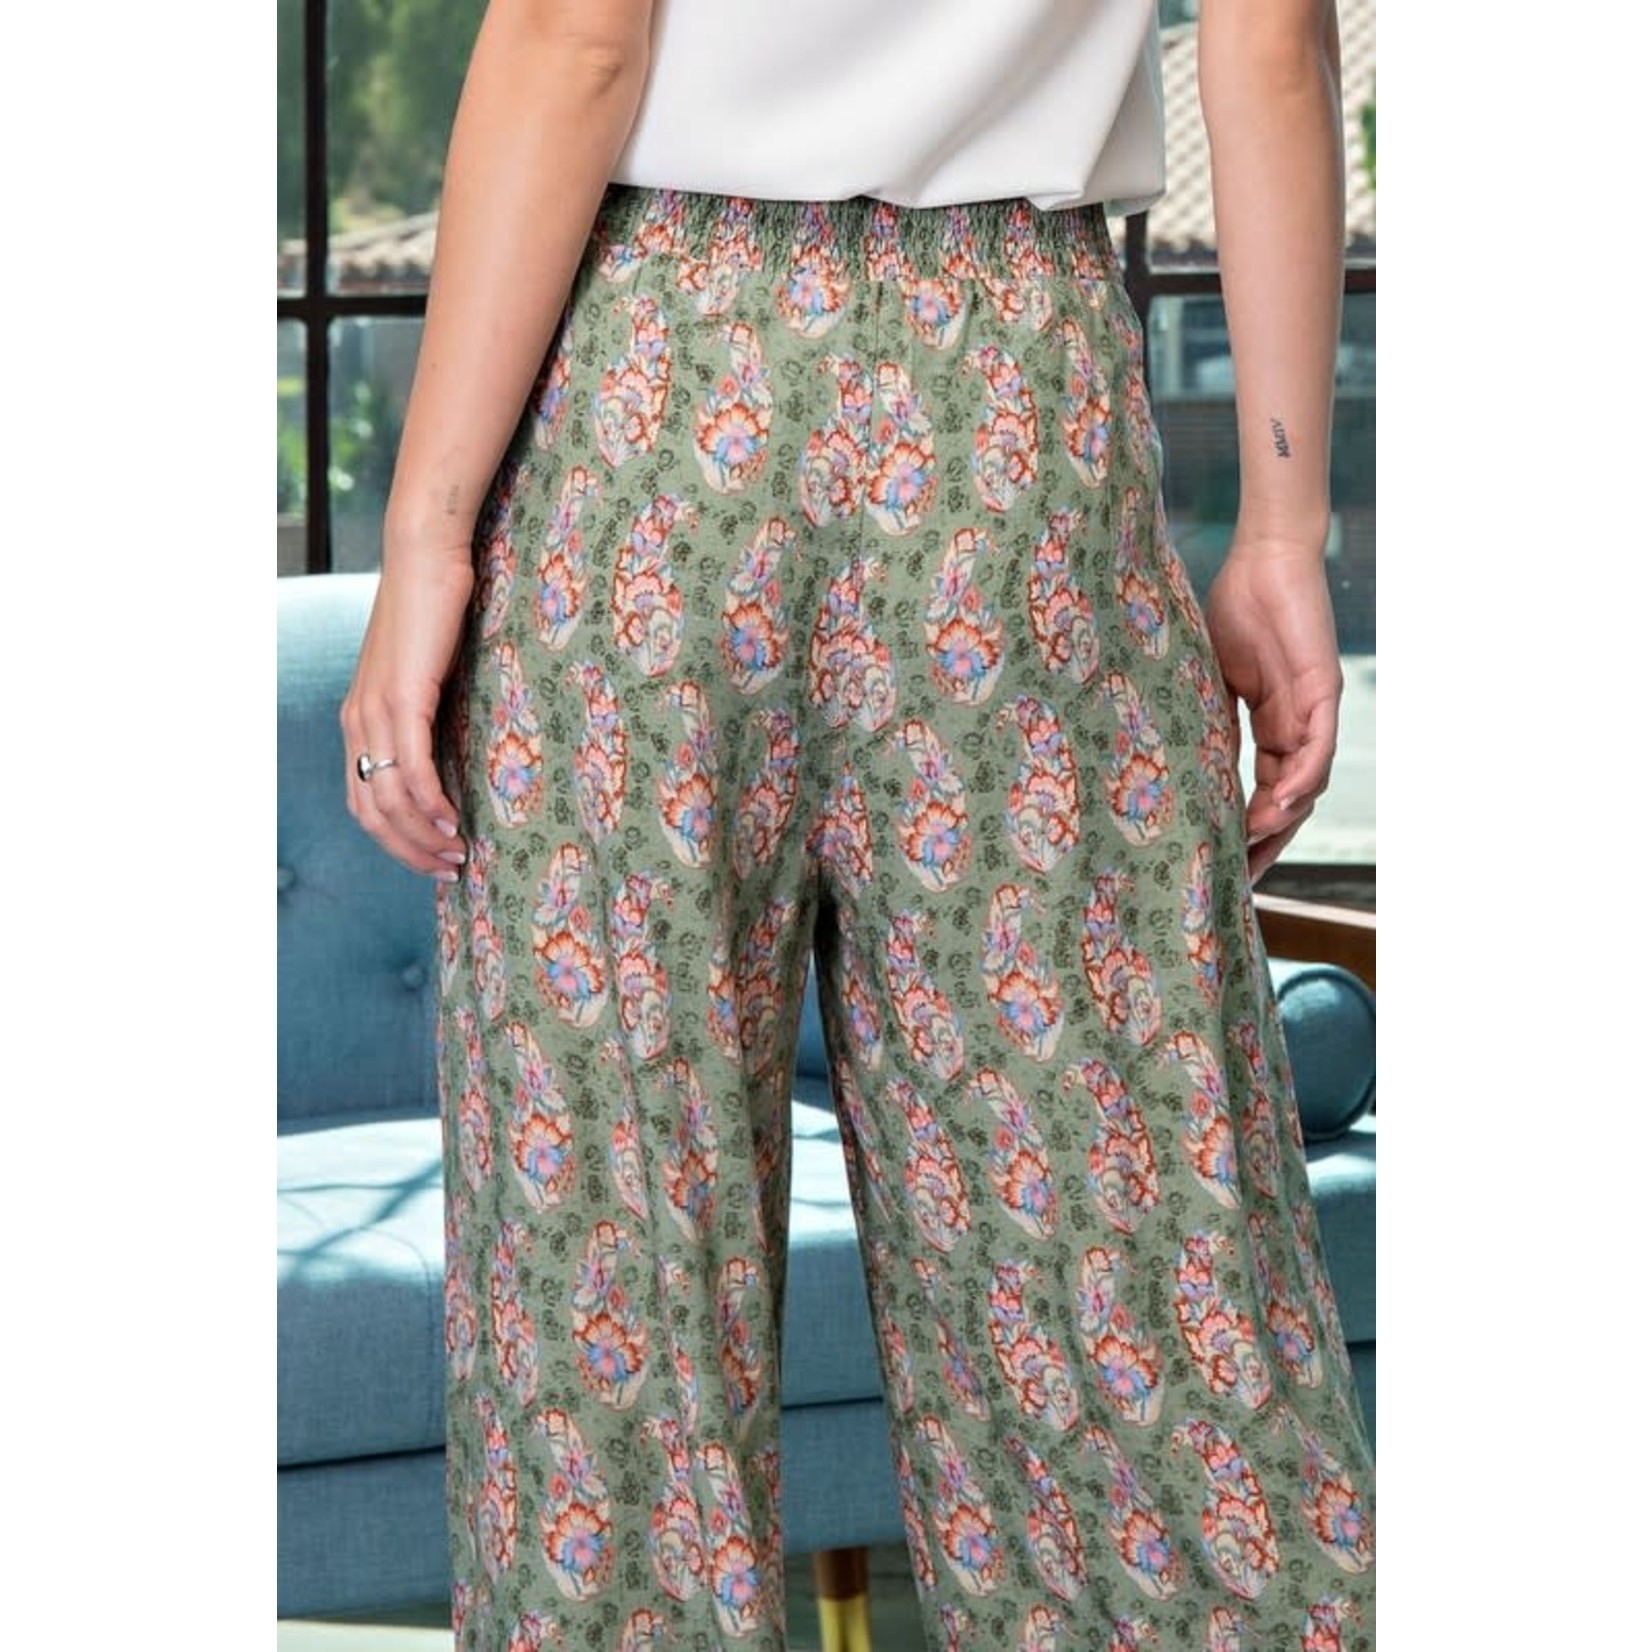 ee:some Shayna Print Flow Pant